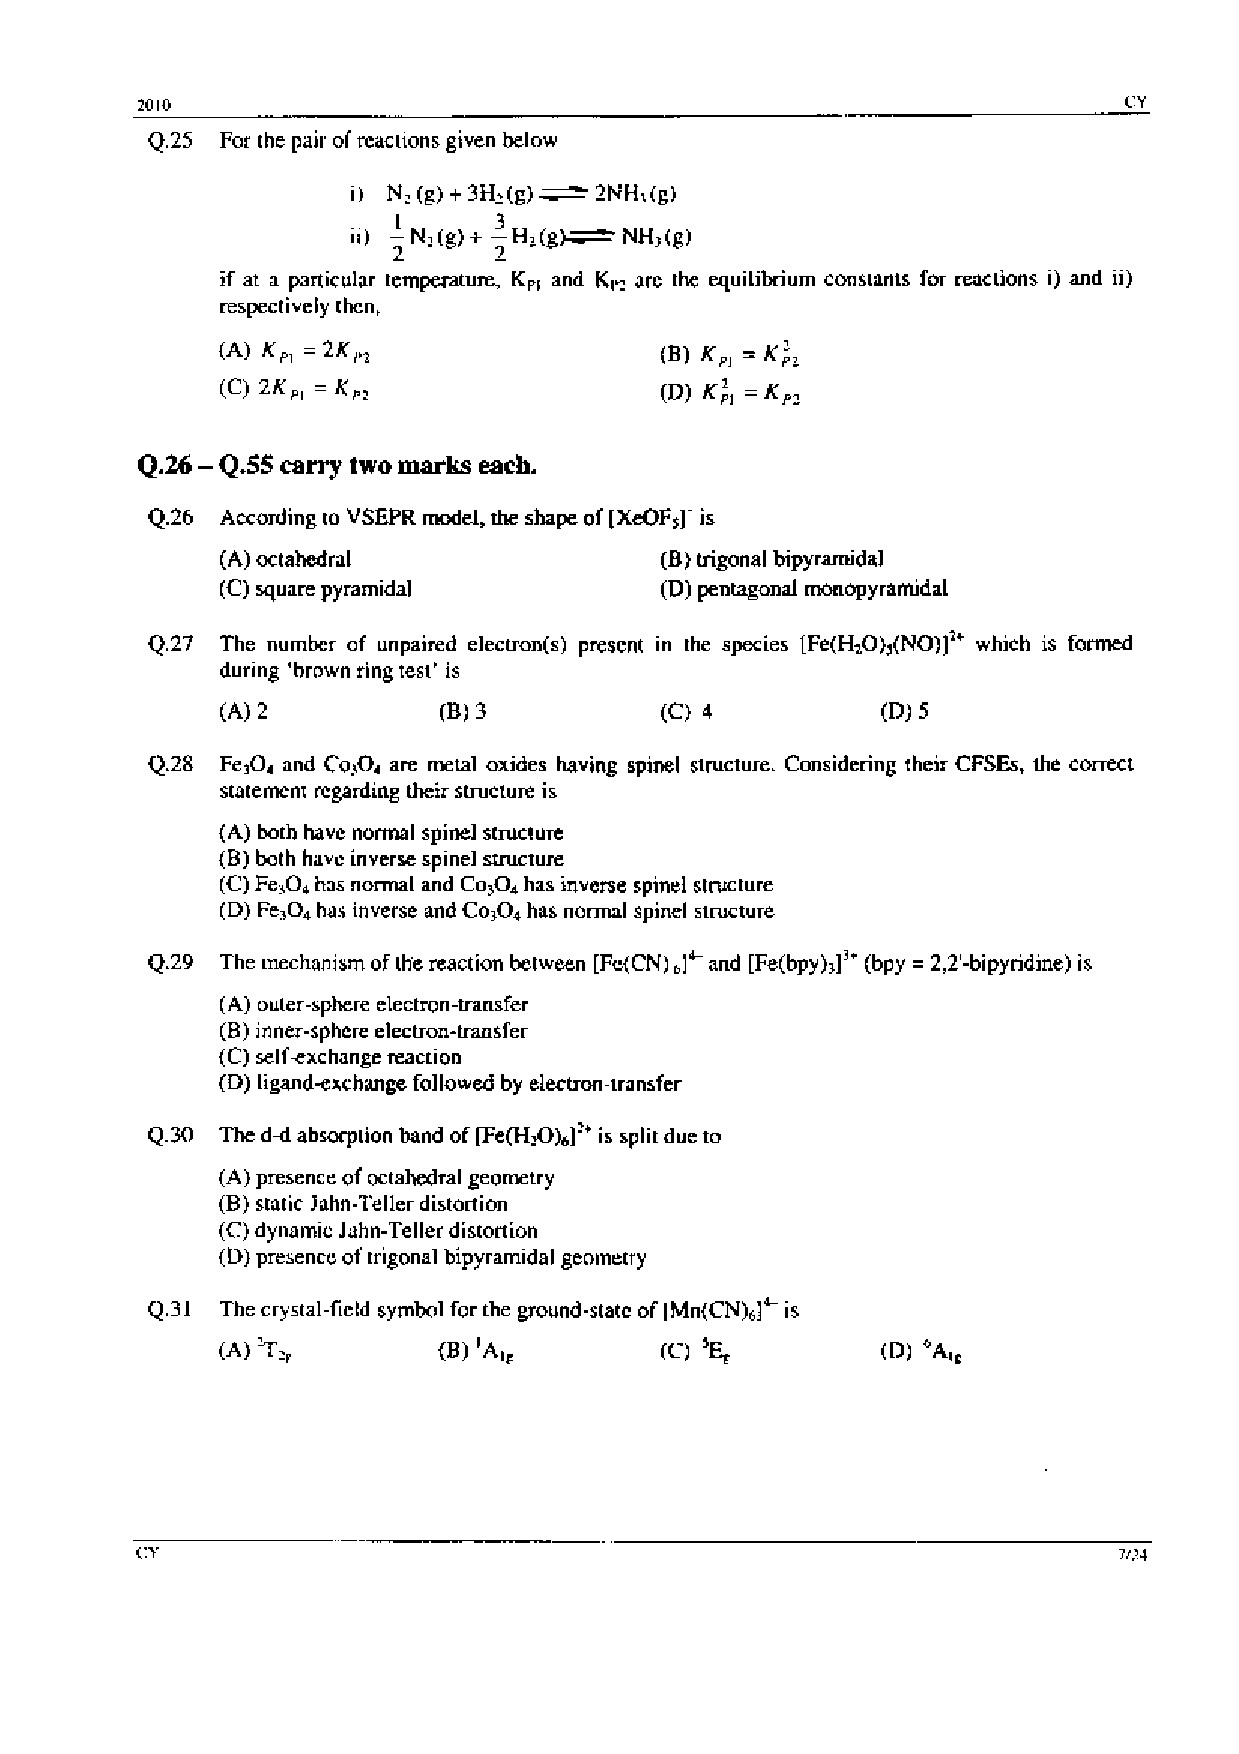 GATE Exam Question Paper 2010 Chemistry 7